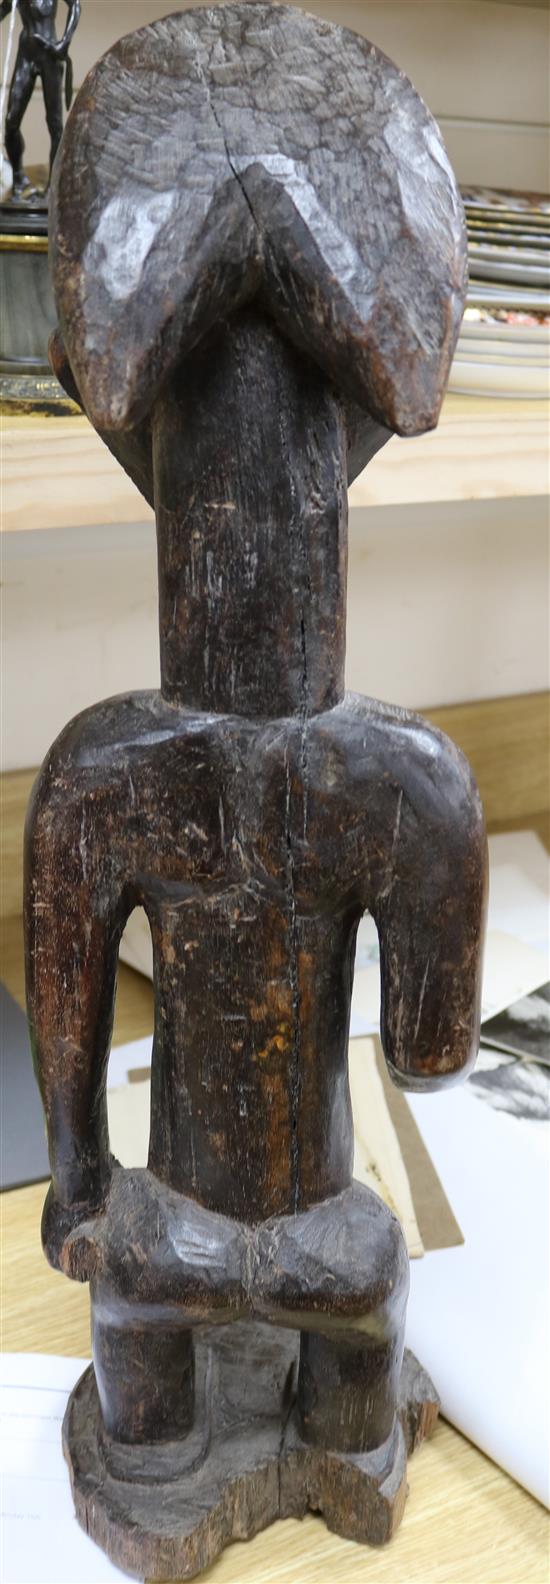 A West African carved wood figure of a standing man height 64cm